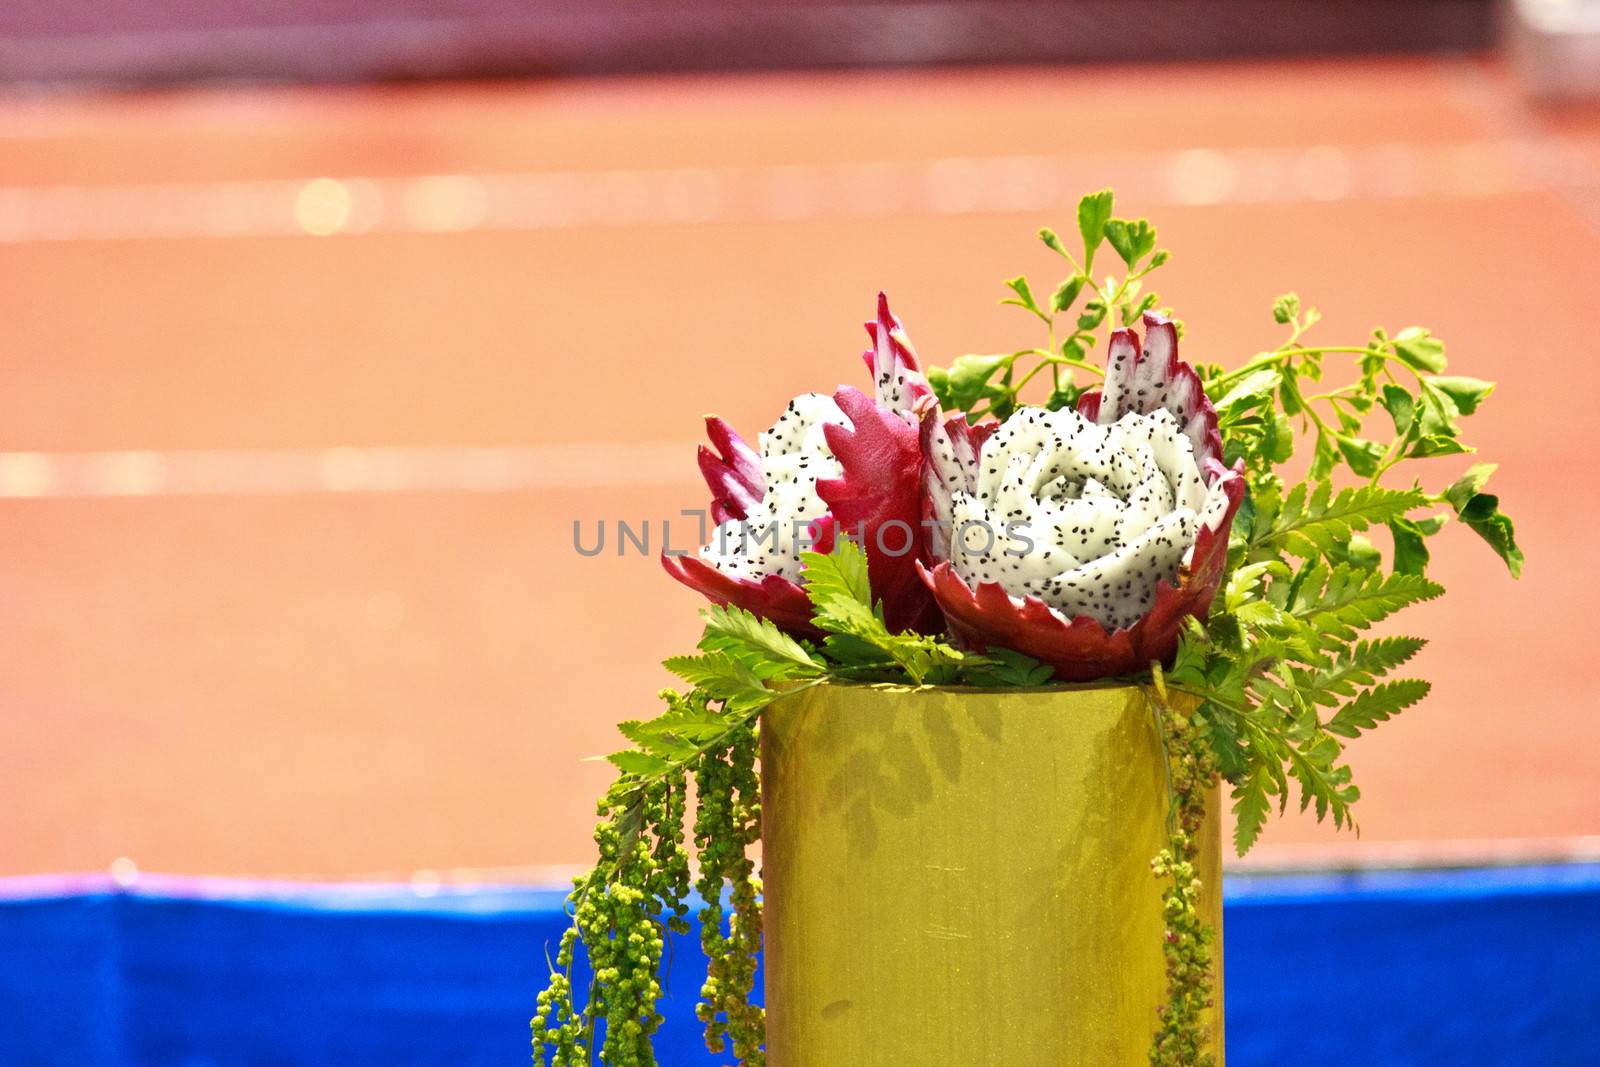 dragon fruit carving in the Thailand ultimate chef challenge 2013